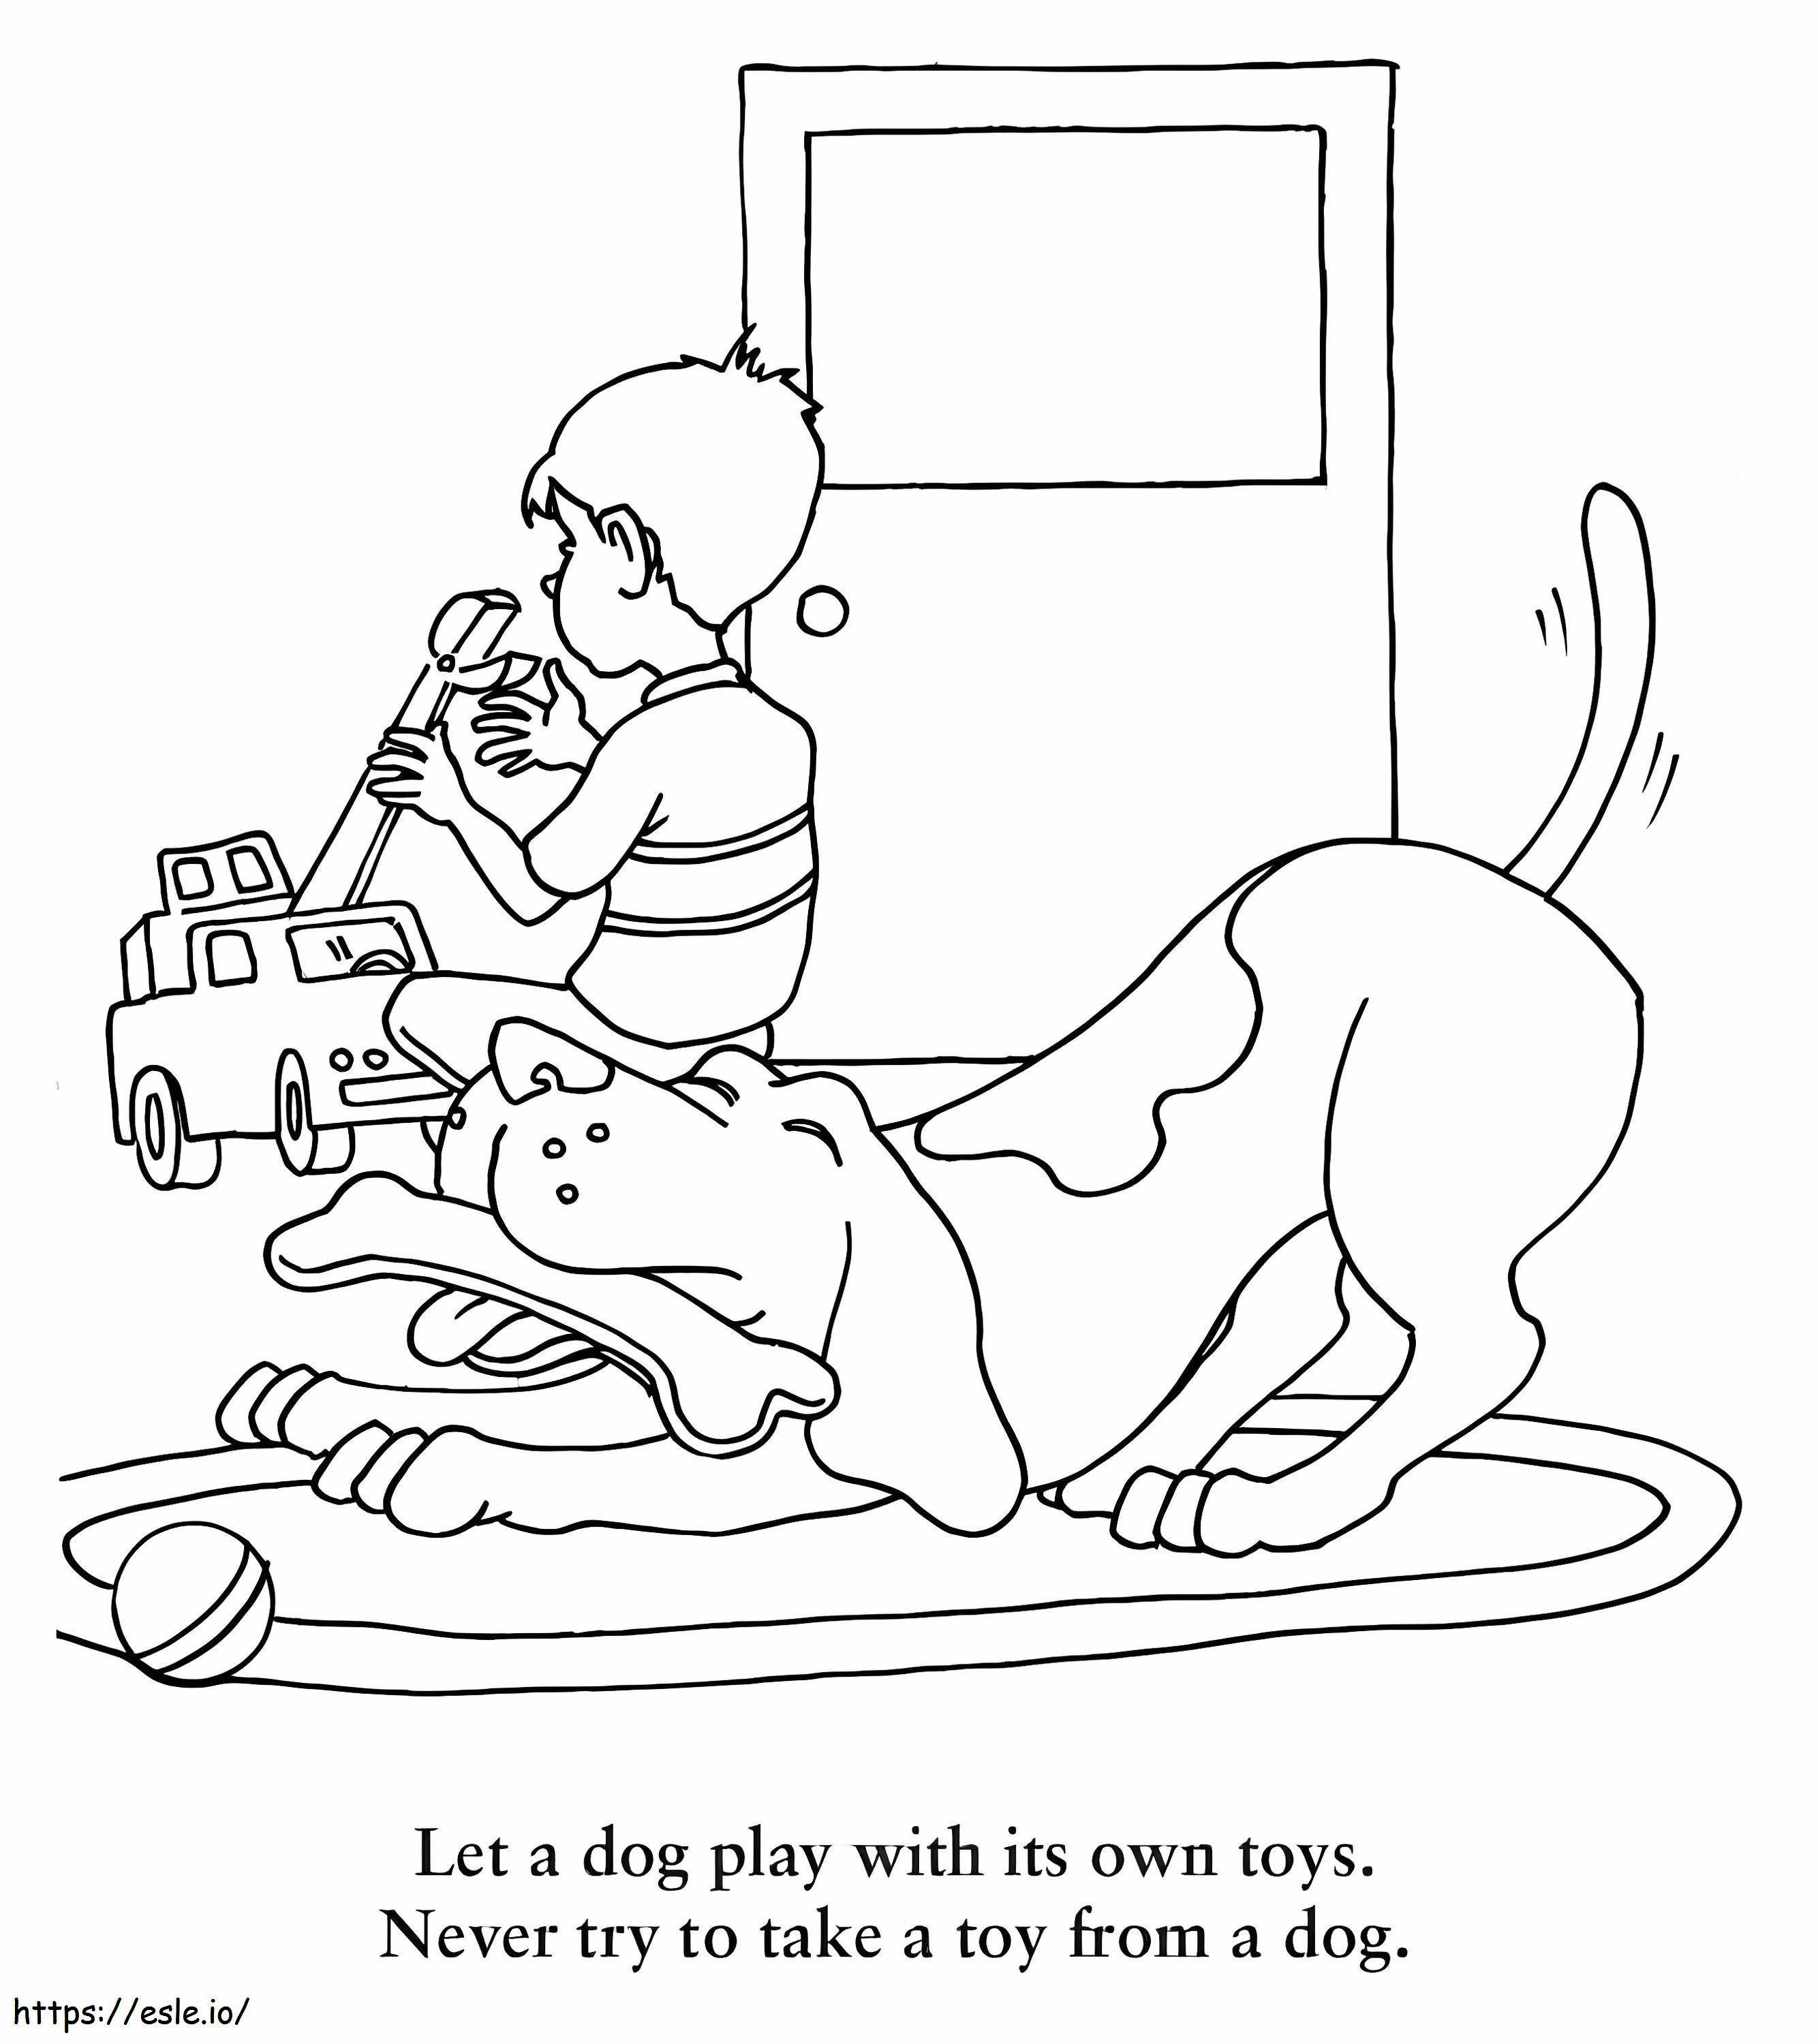 Dog Safety For Kid coloring page